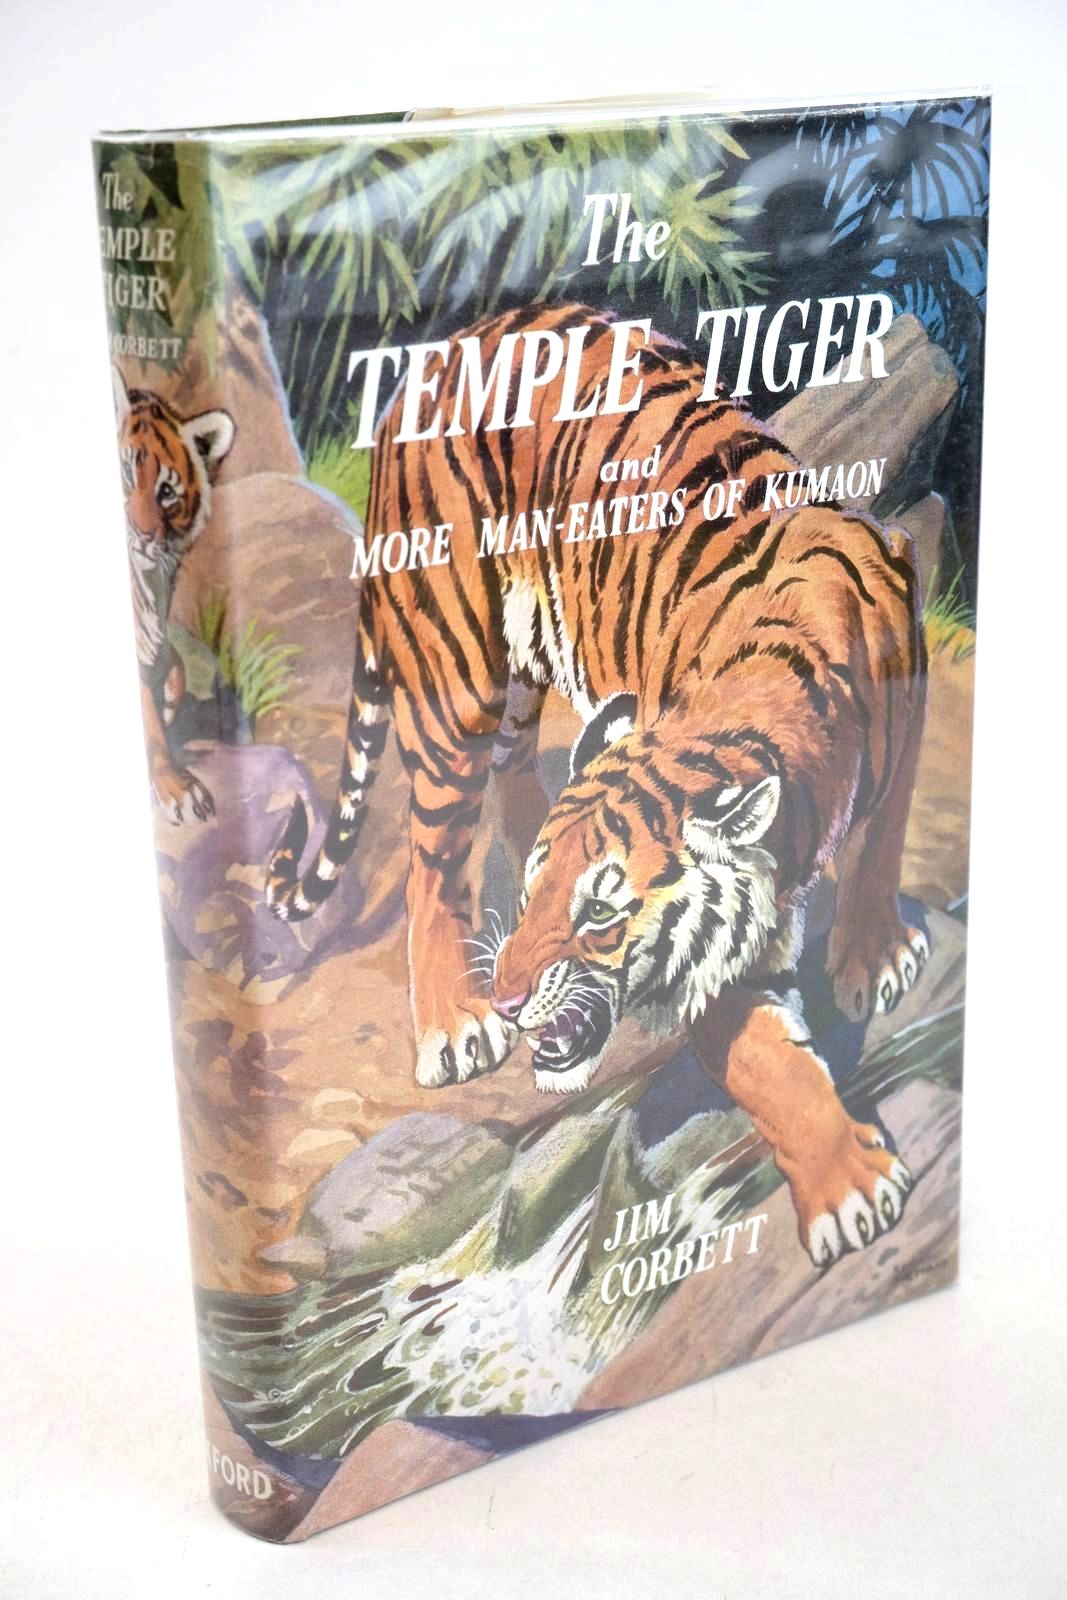 Photo of THE TEMPLE TIGER AND MORE MAN-EATERS OF KUMAON written by Corbett, Jim illustrated by Sheppard, Raymond published by Oxford University Press (STOCK CODE: 1327303)  for sale by Stella & Rose's Books